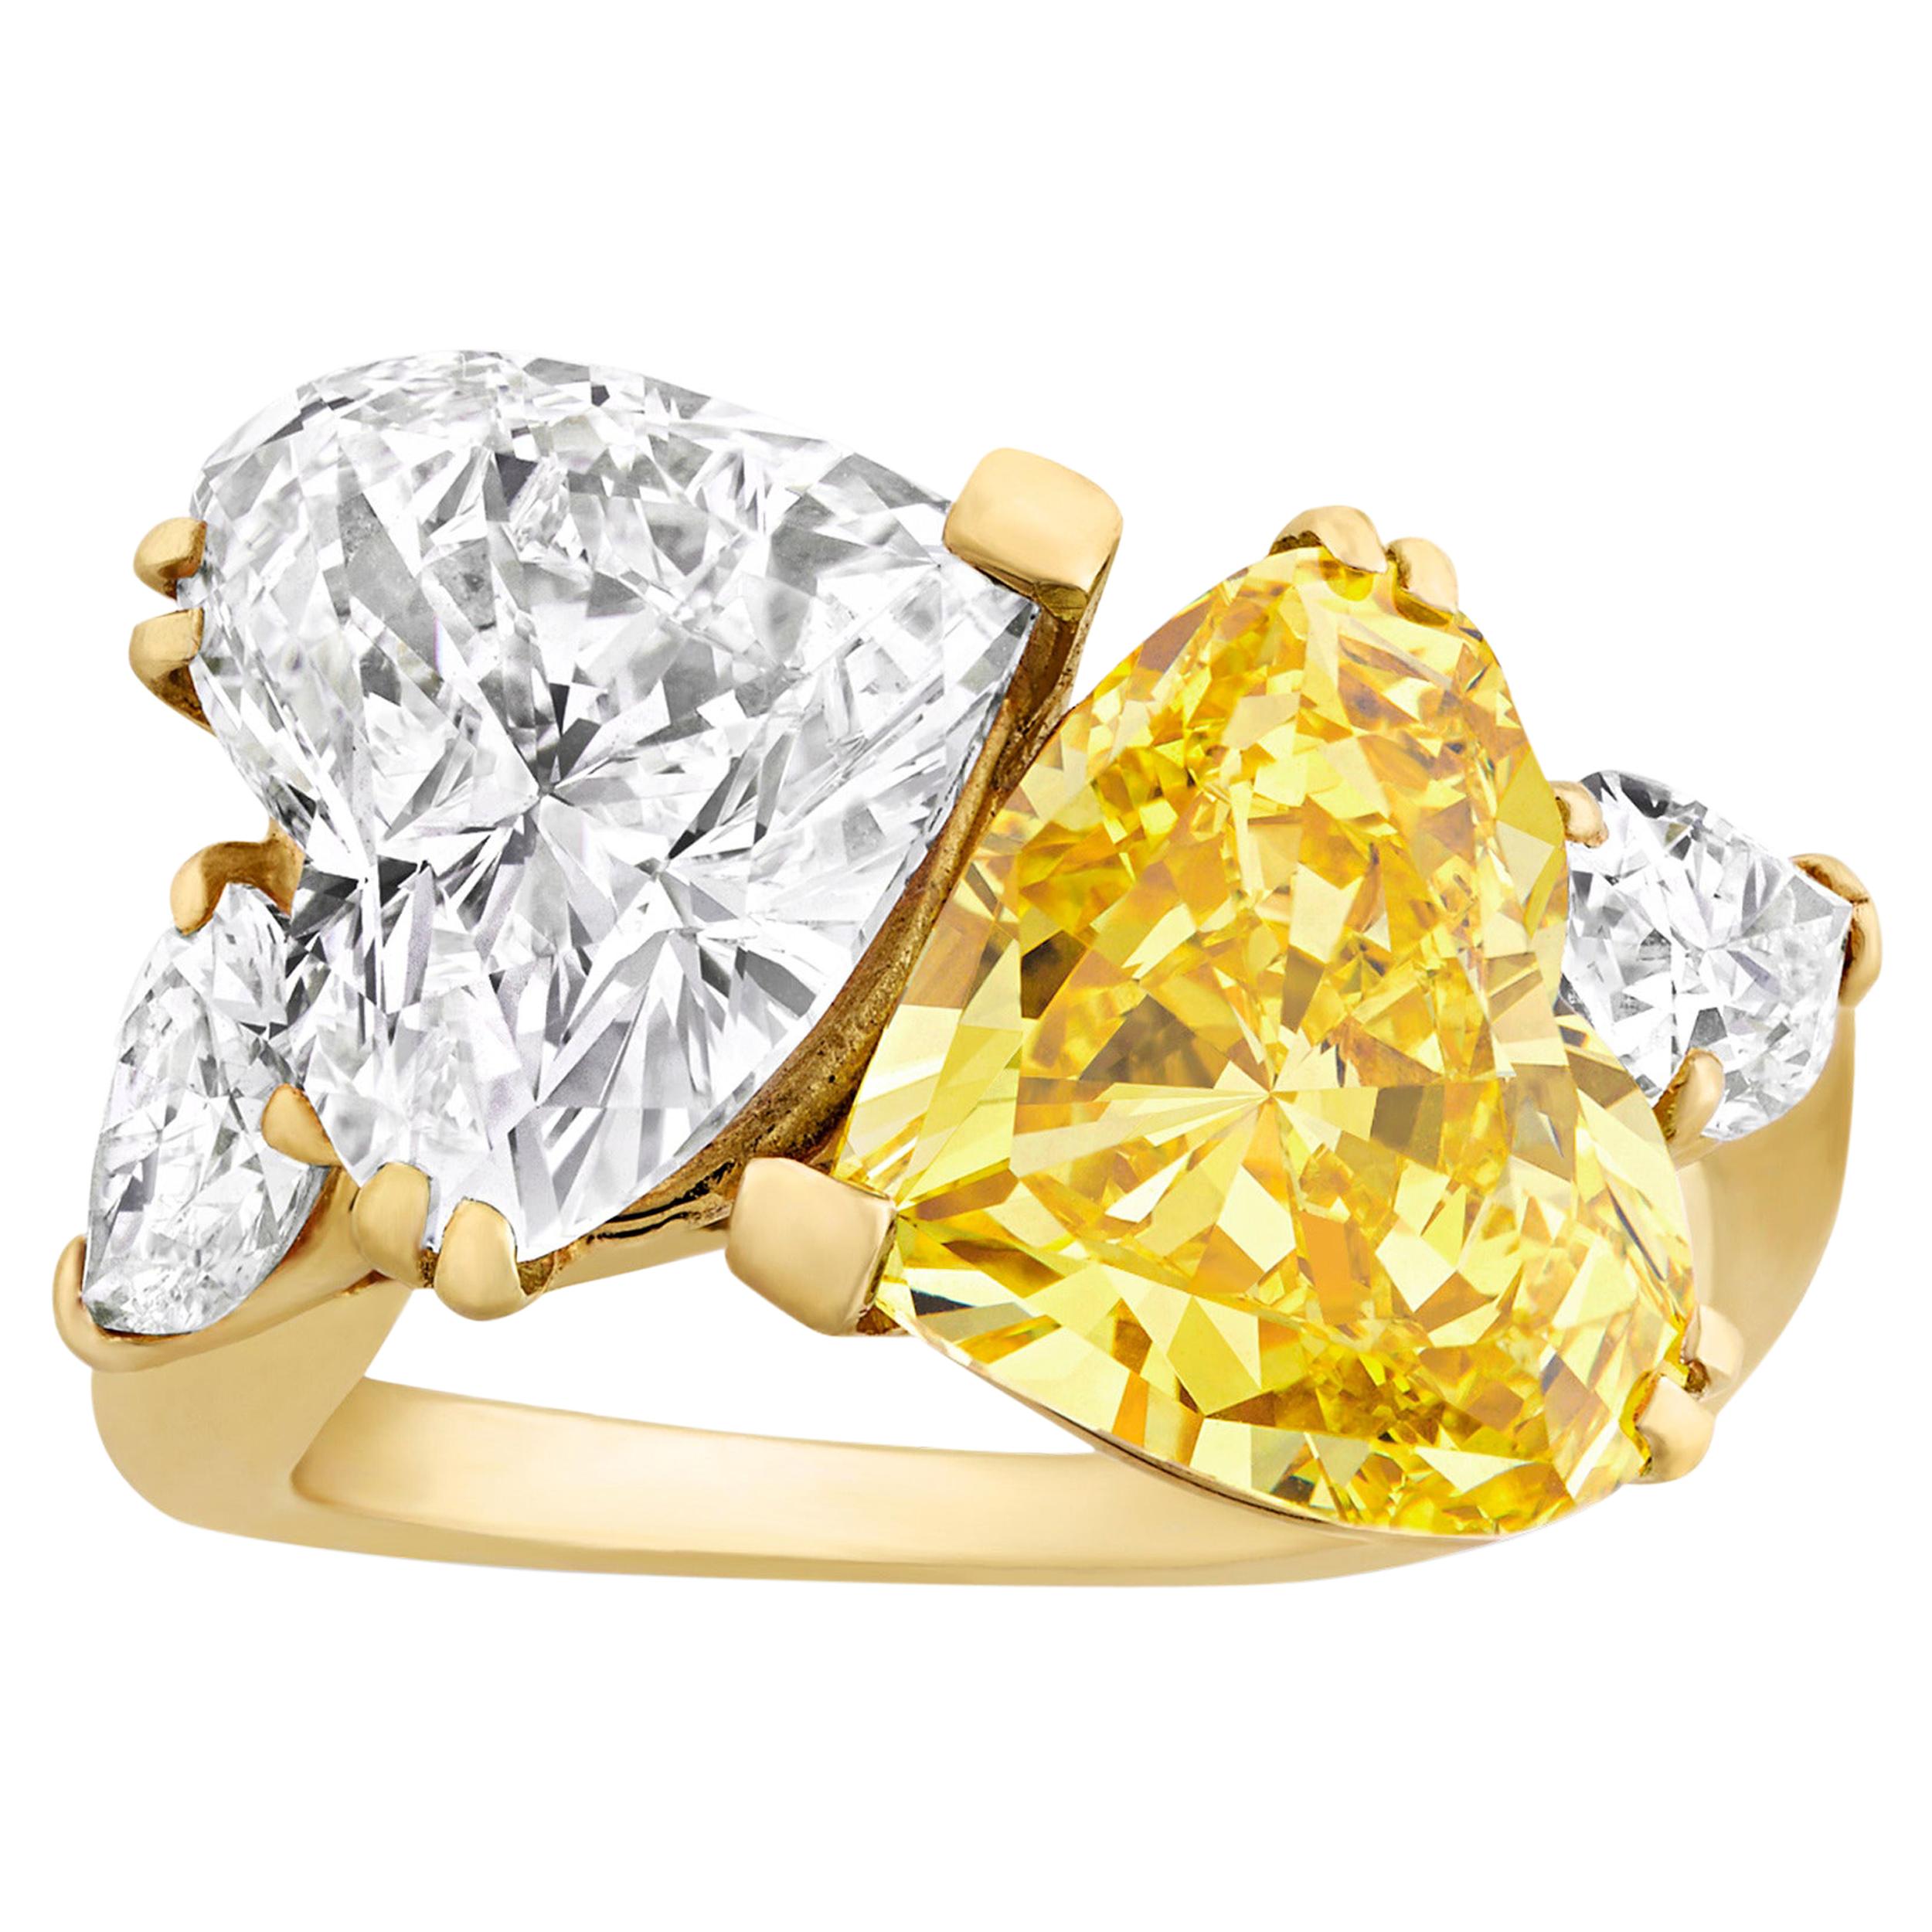 Two captivating heart-shaped diamonds intersect in this ring from the House of Cartier. The first, an extraordinary 3.02-carat natural fancy vivid yellow diamond with VVS1 clarity, glistens with the radiance of pure sunshine, while the other, a